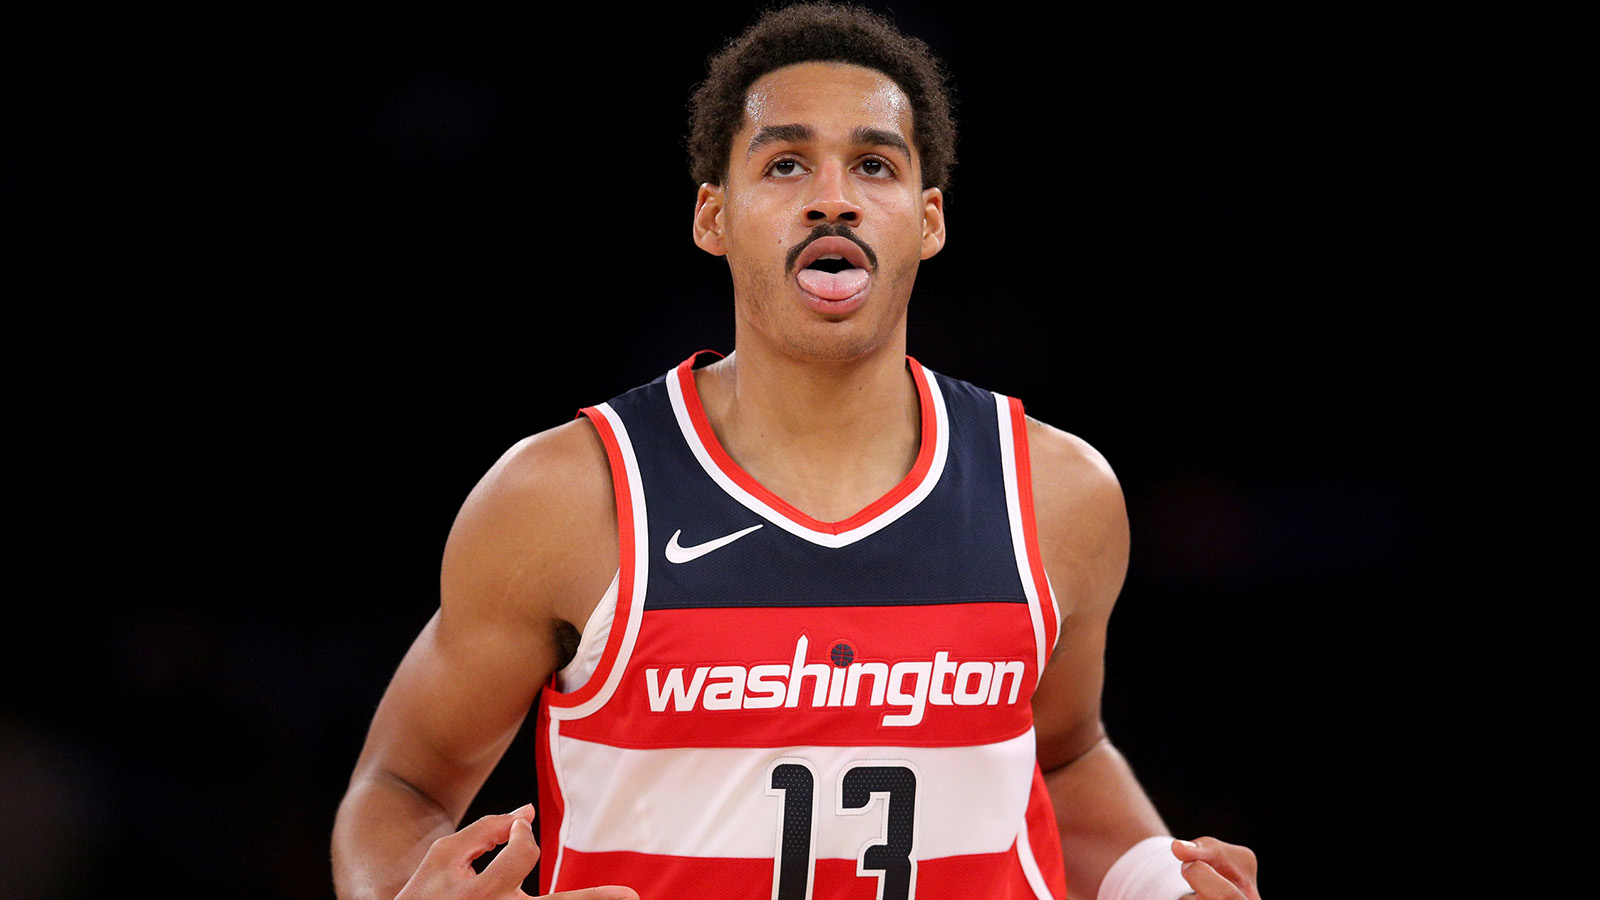 NBA Twitter reacts to Jordan Poole in a Wizards jersey